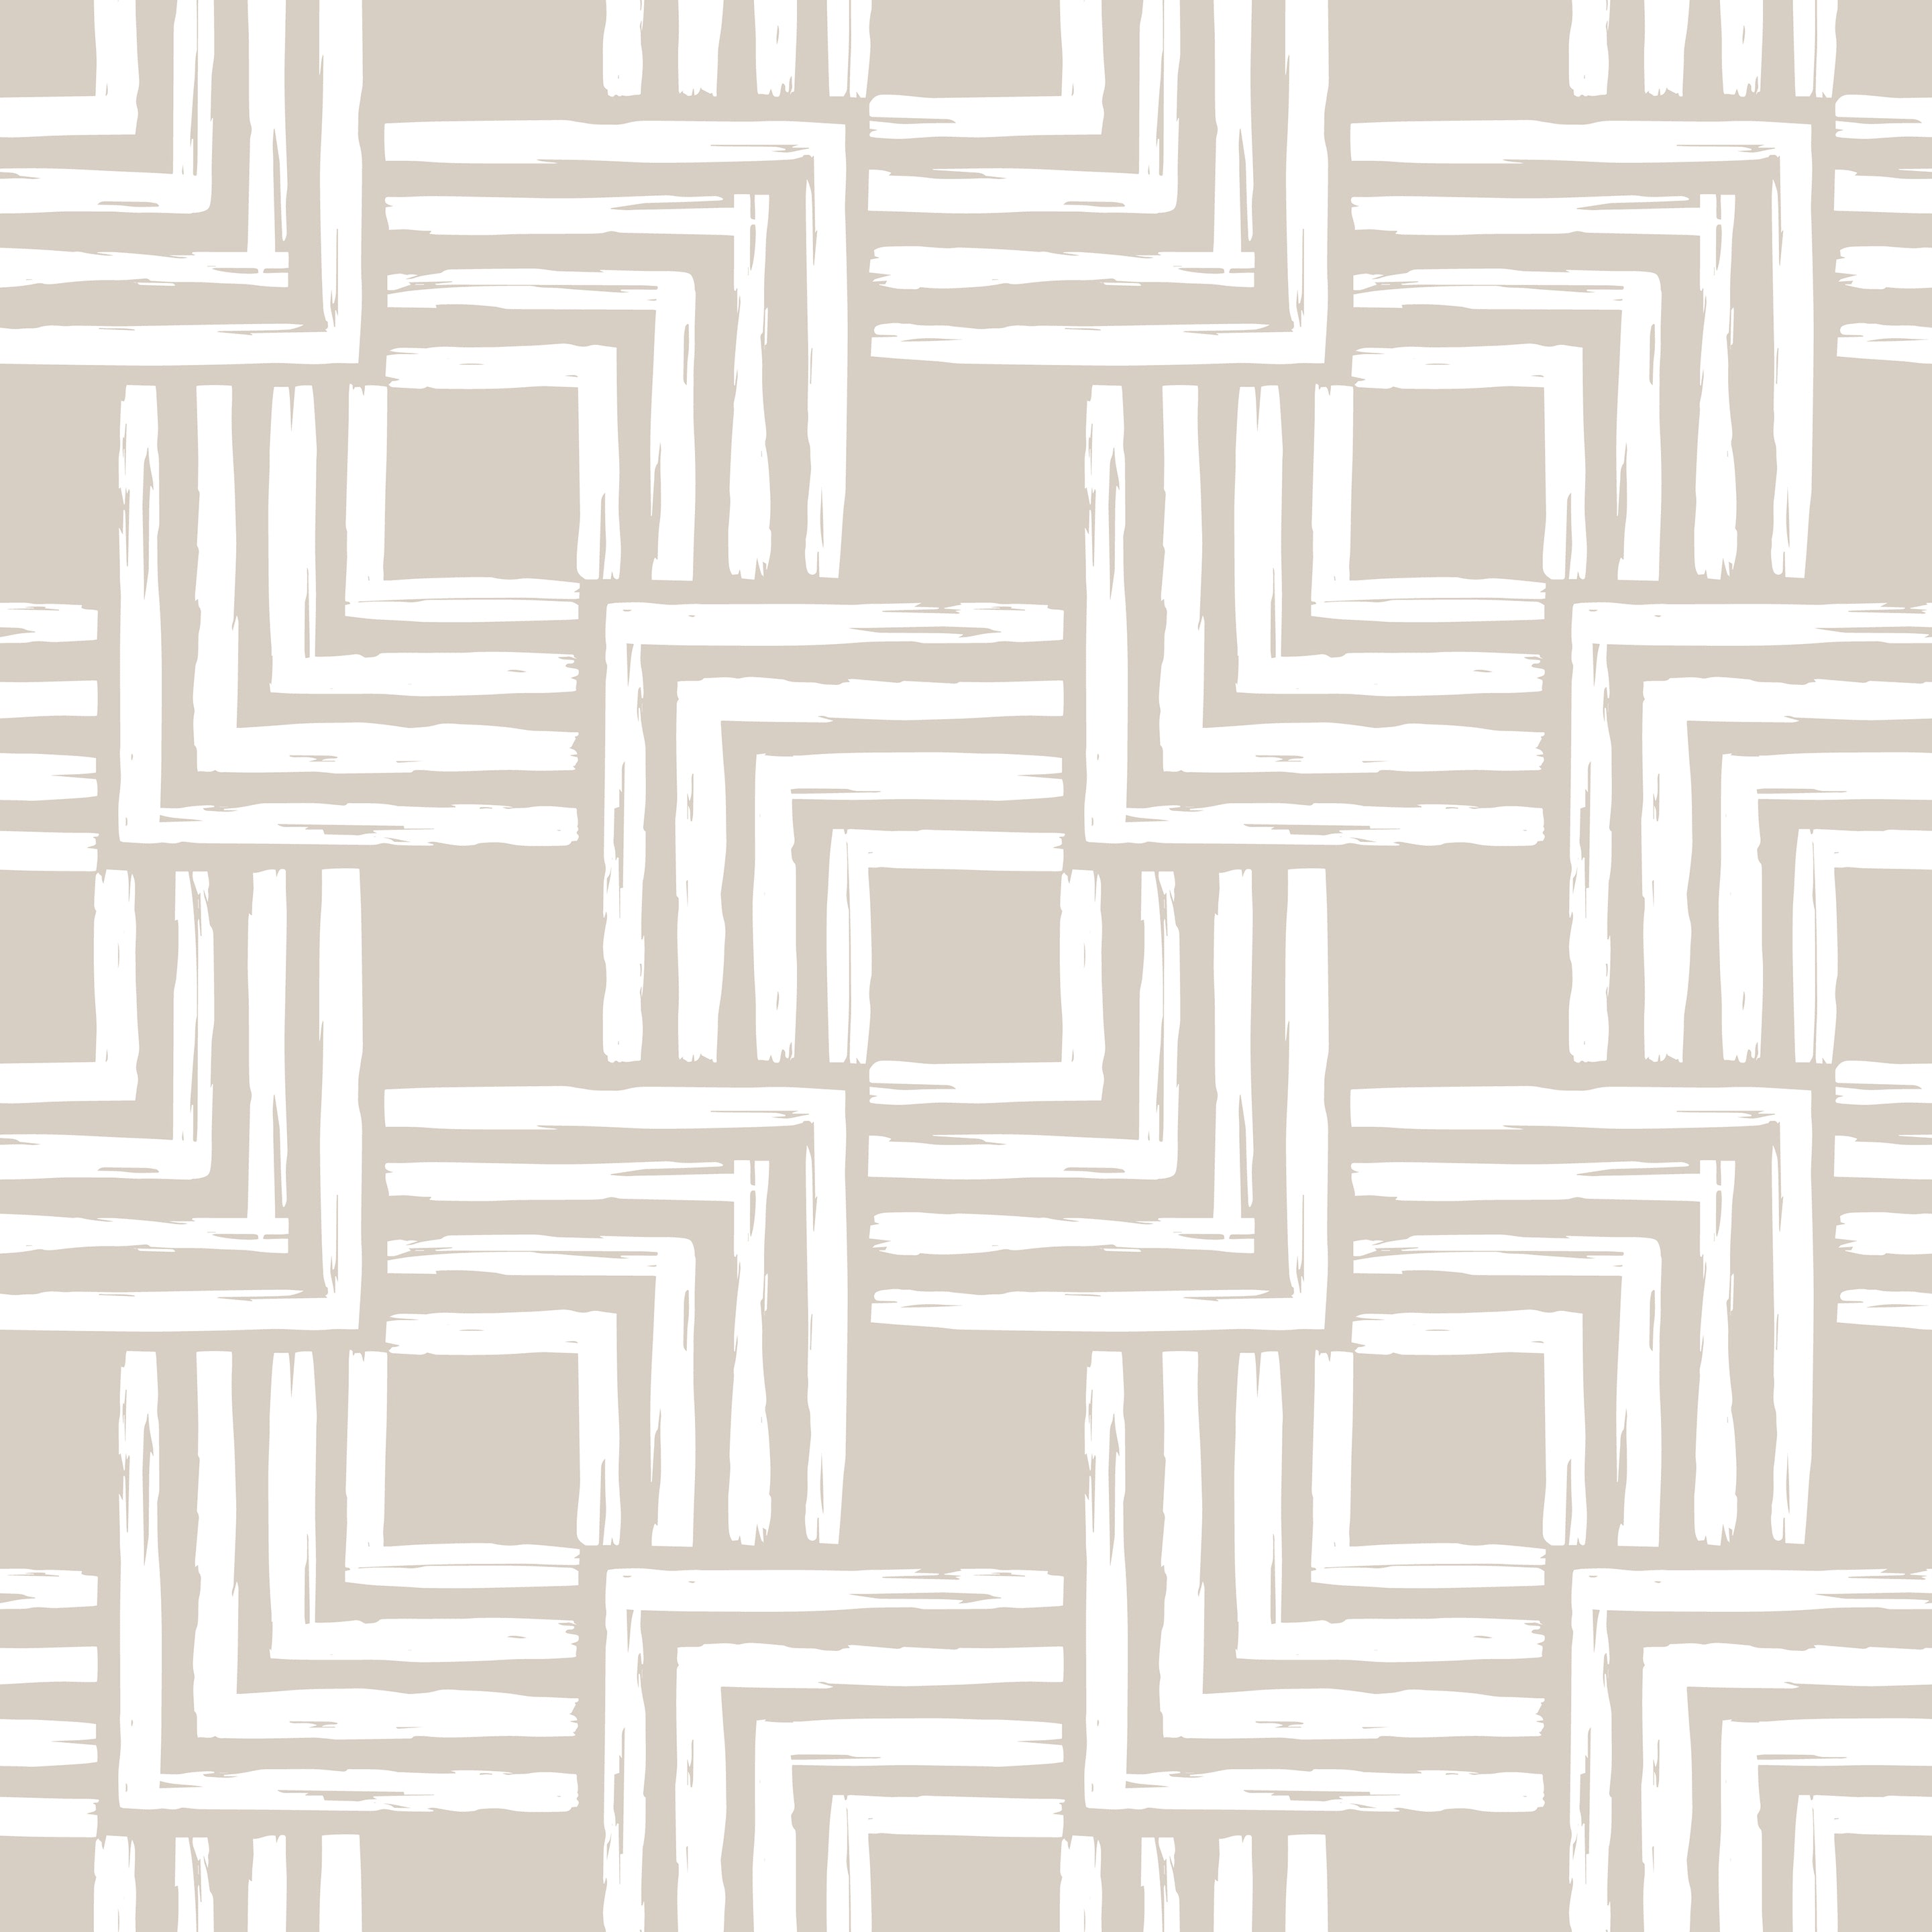 A detailed look at Organic Wallpaper 3 featuring a dynamic pattern of angular brushstrokes forming squares and rectangles in a neutral taupe color on a white background, giving it a modern, abstract feel